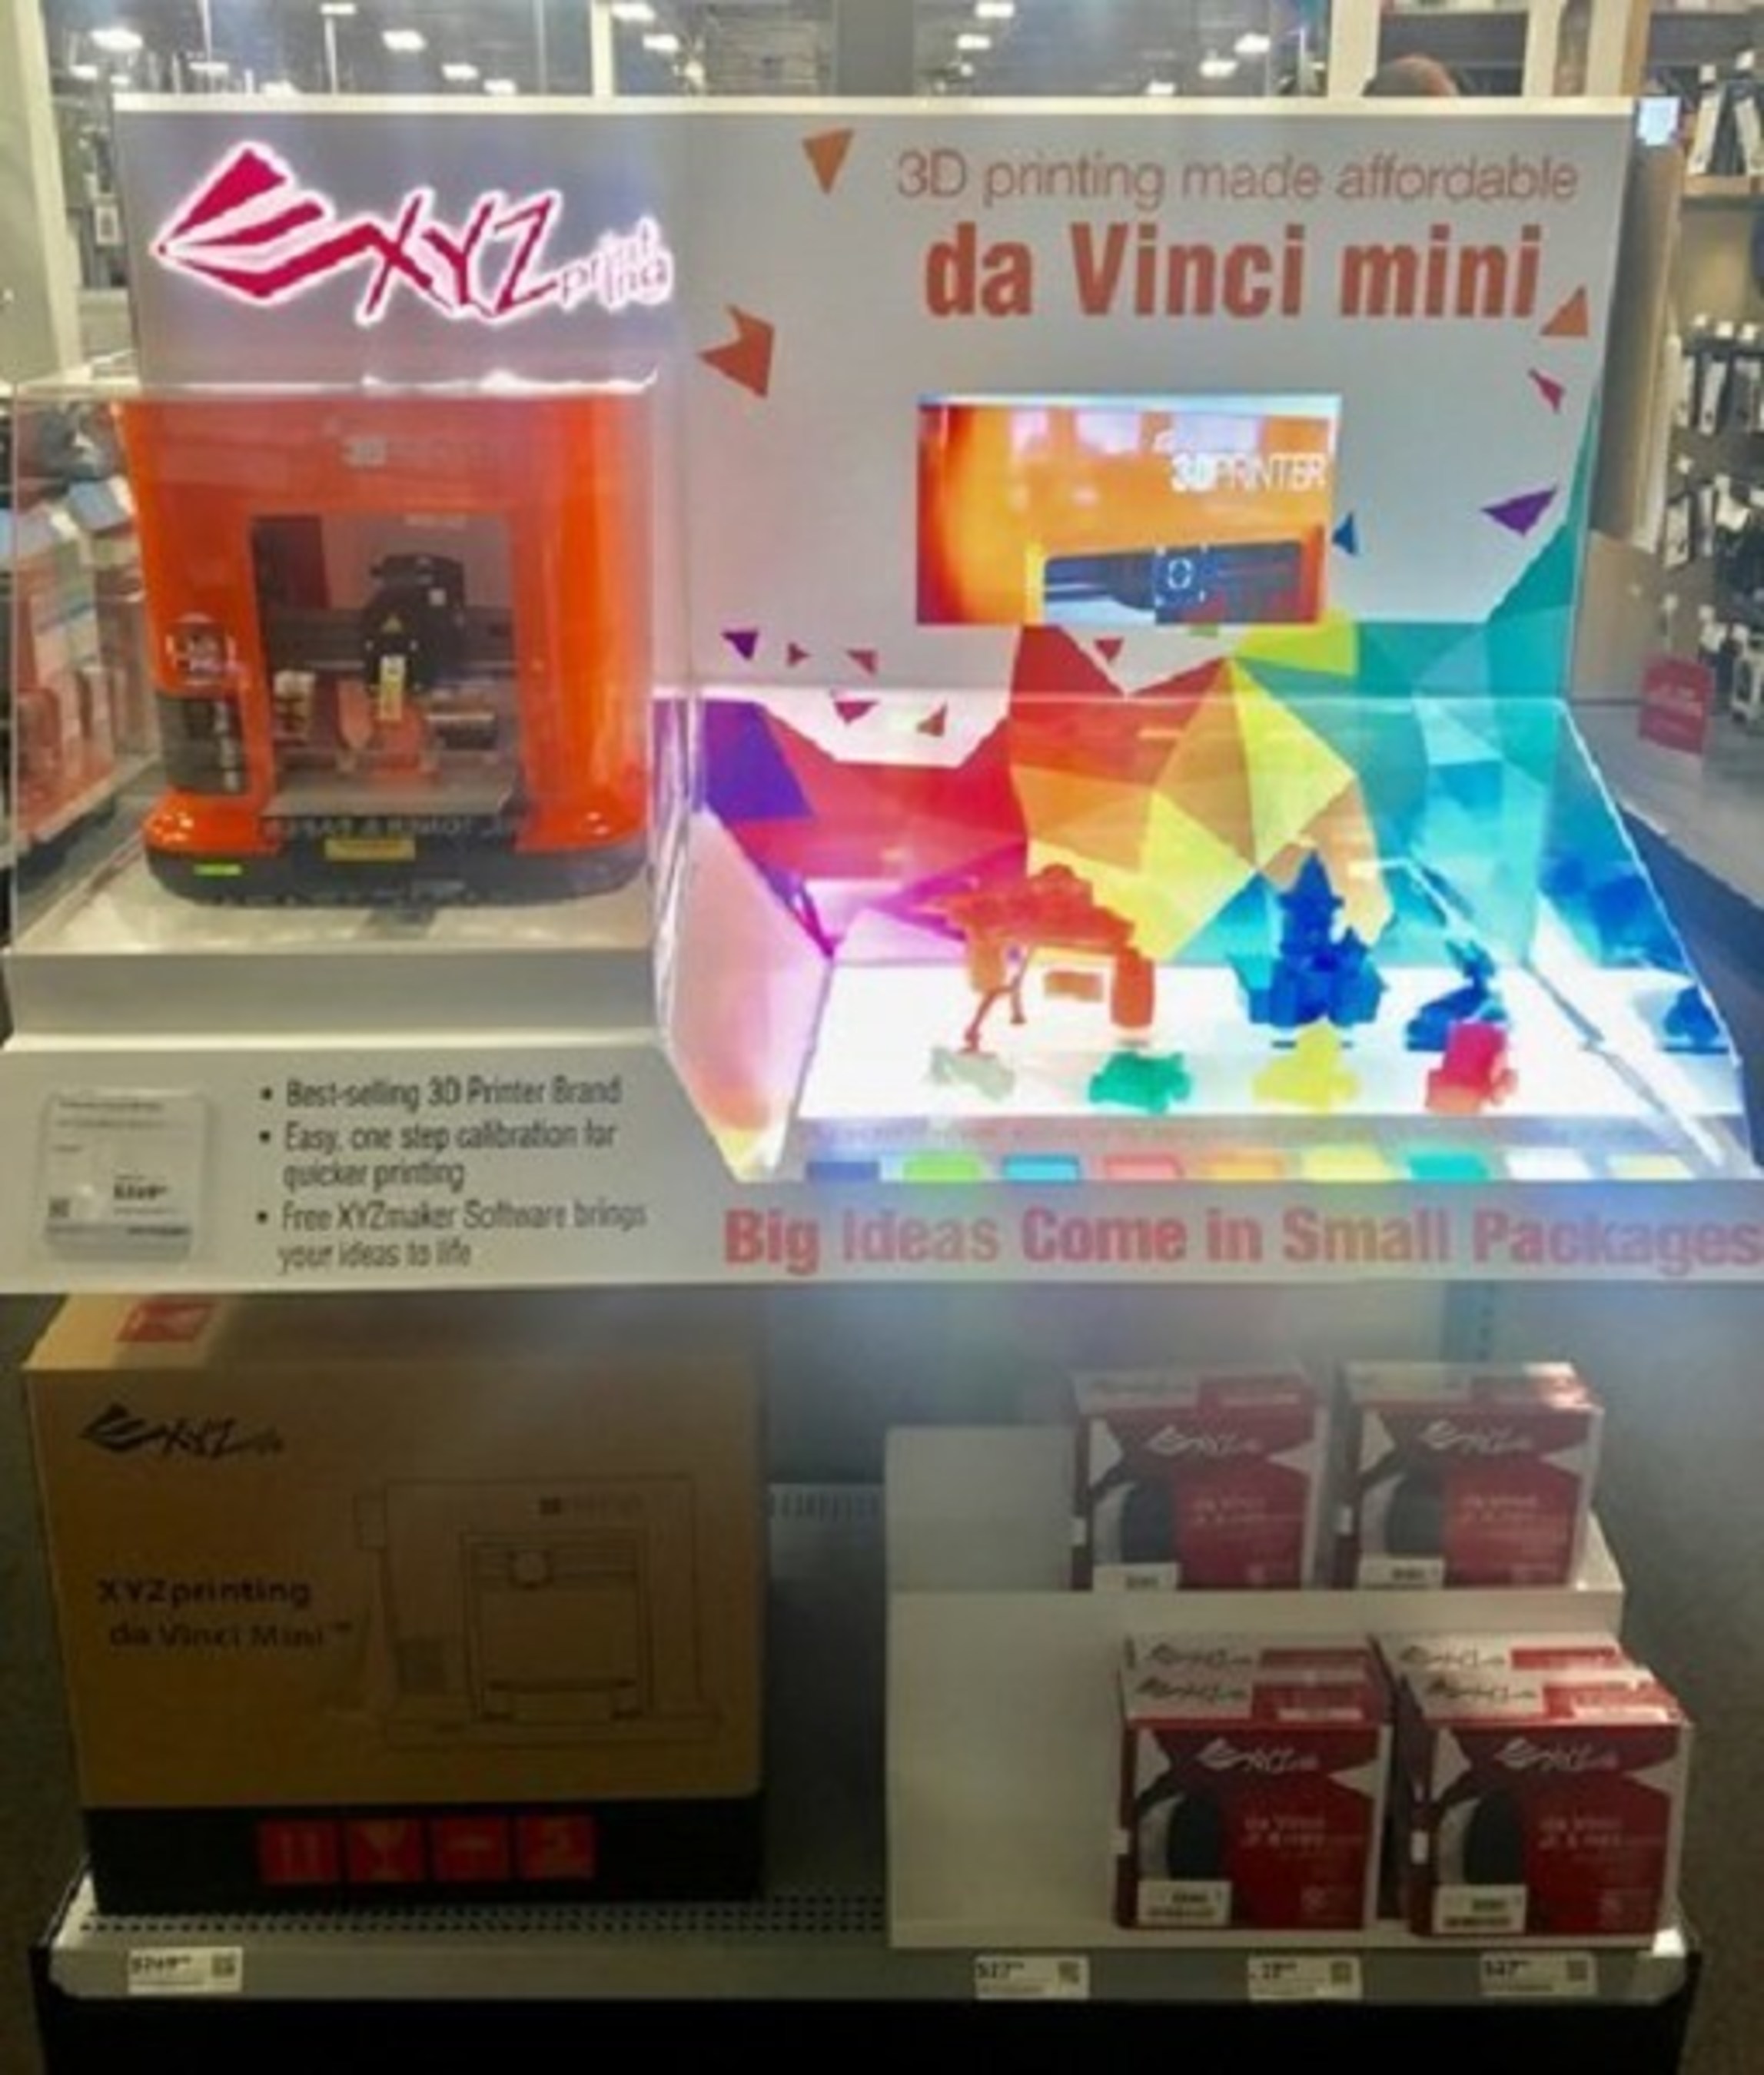 XYZprinting's lauded da Vinci Mini (MSRP $289) will be available in select Best Buy locations across the United States and on BestBuy.com.